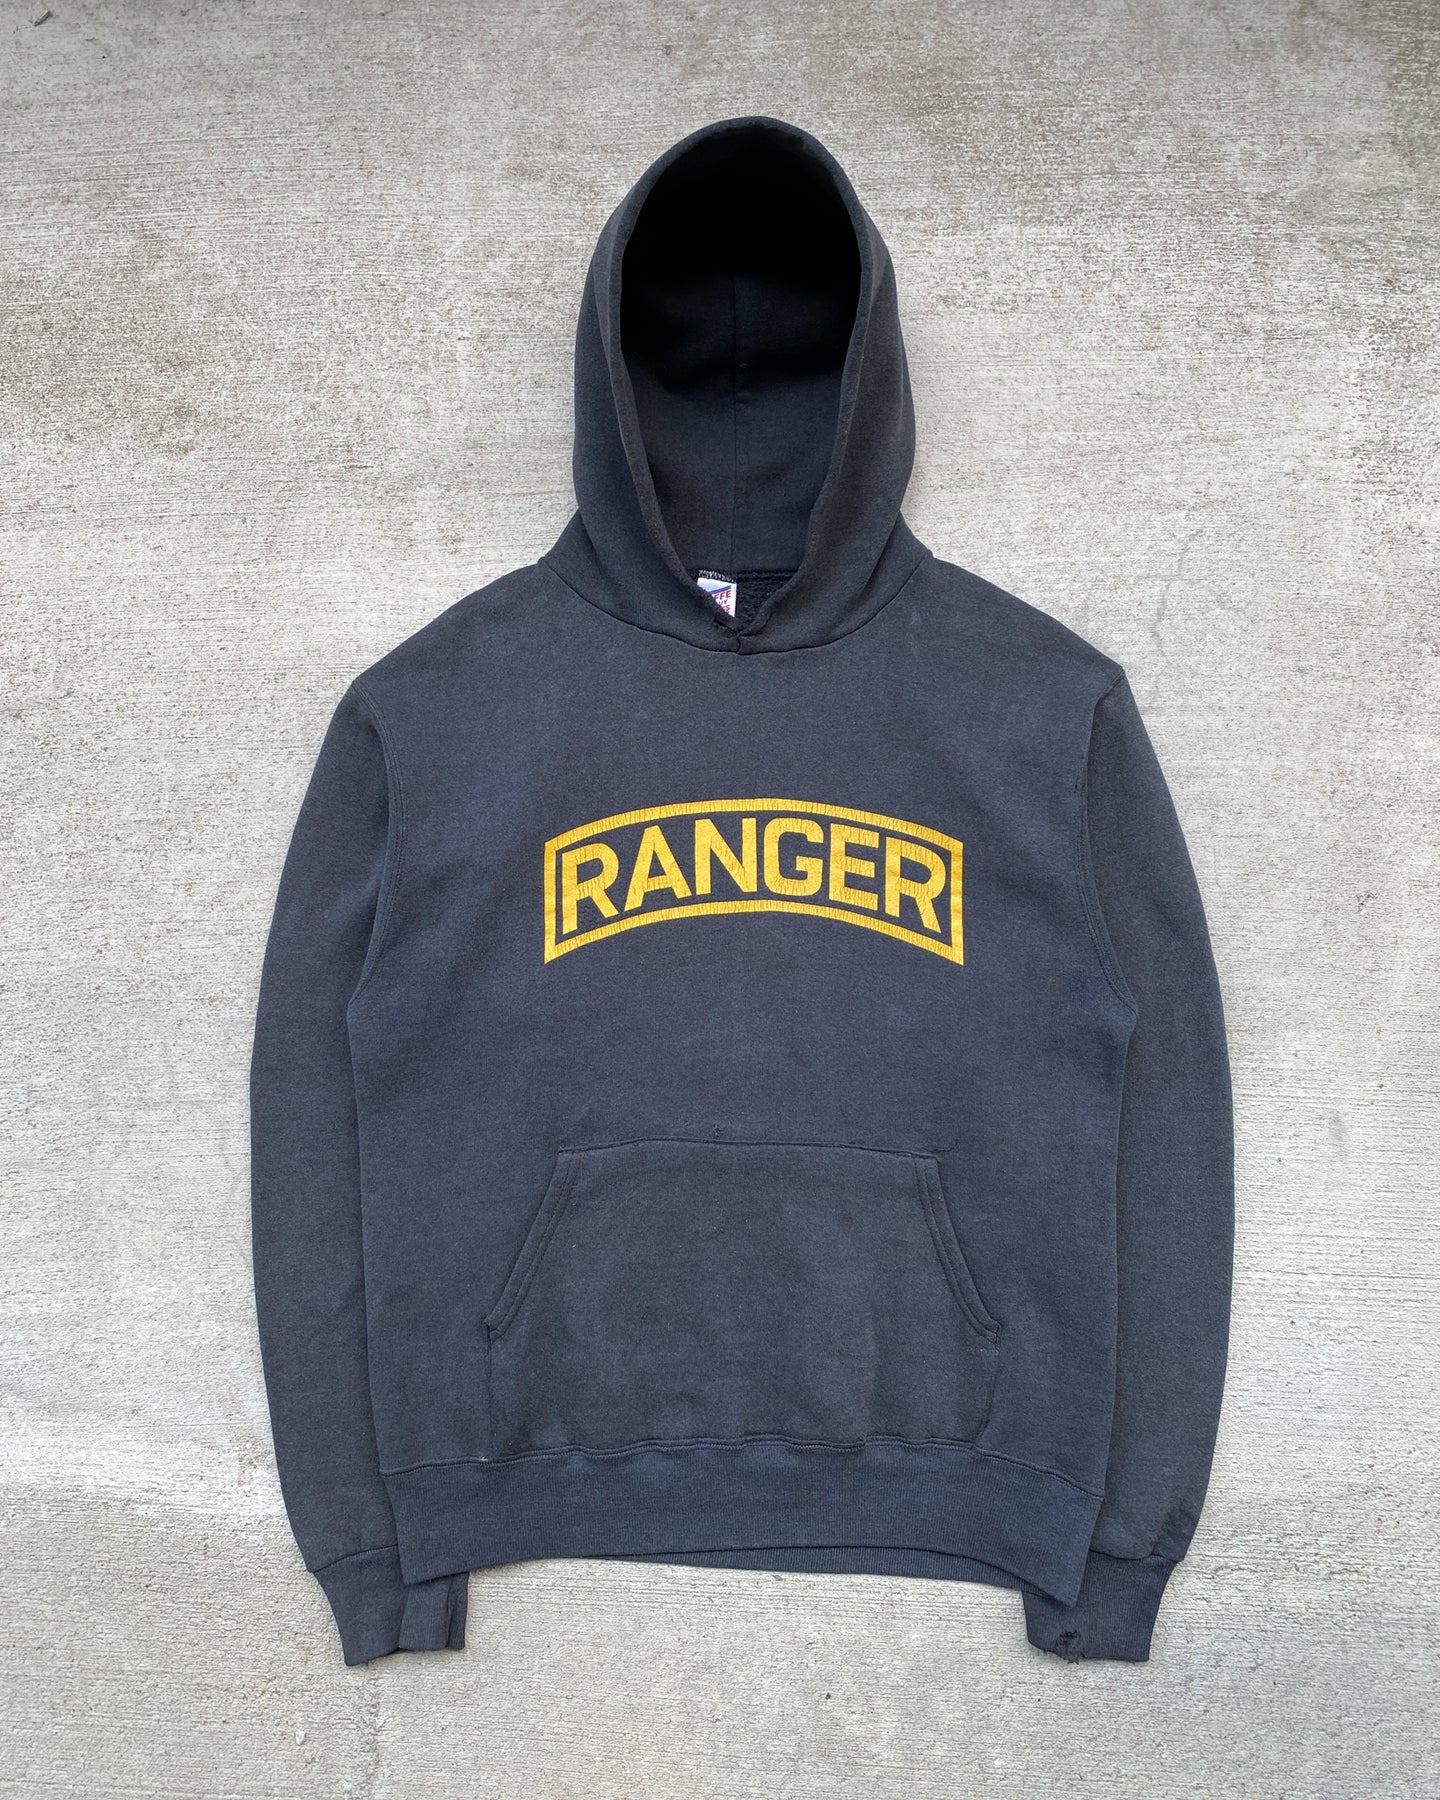 1980s Army Rangers Faded Black Hoodie - Size Large